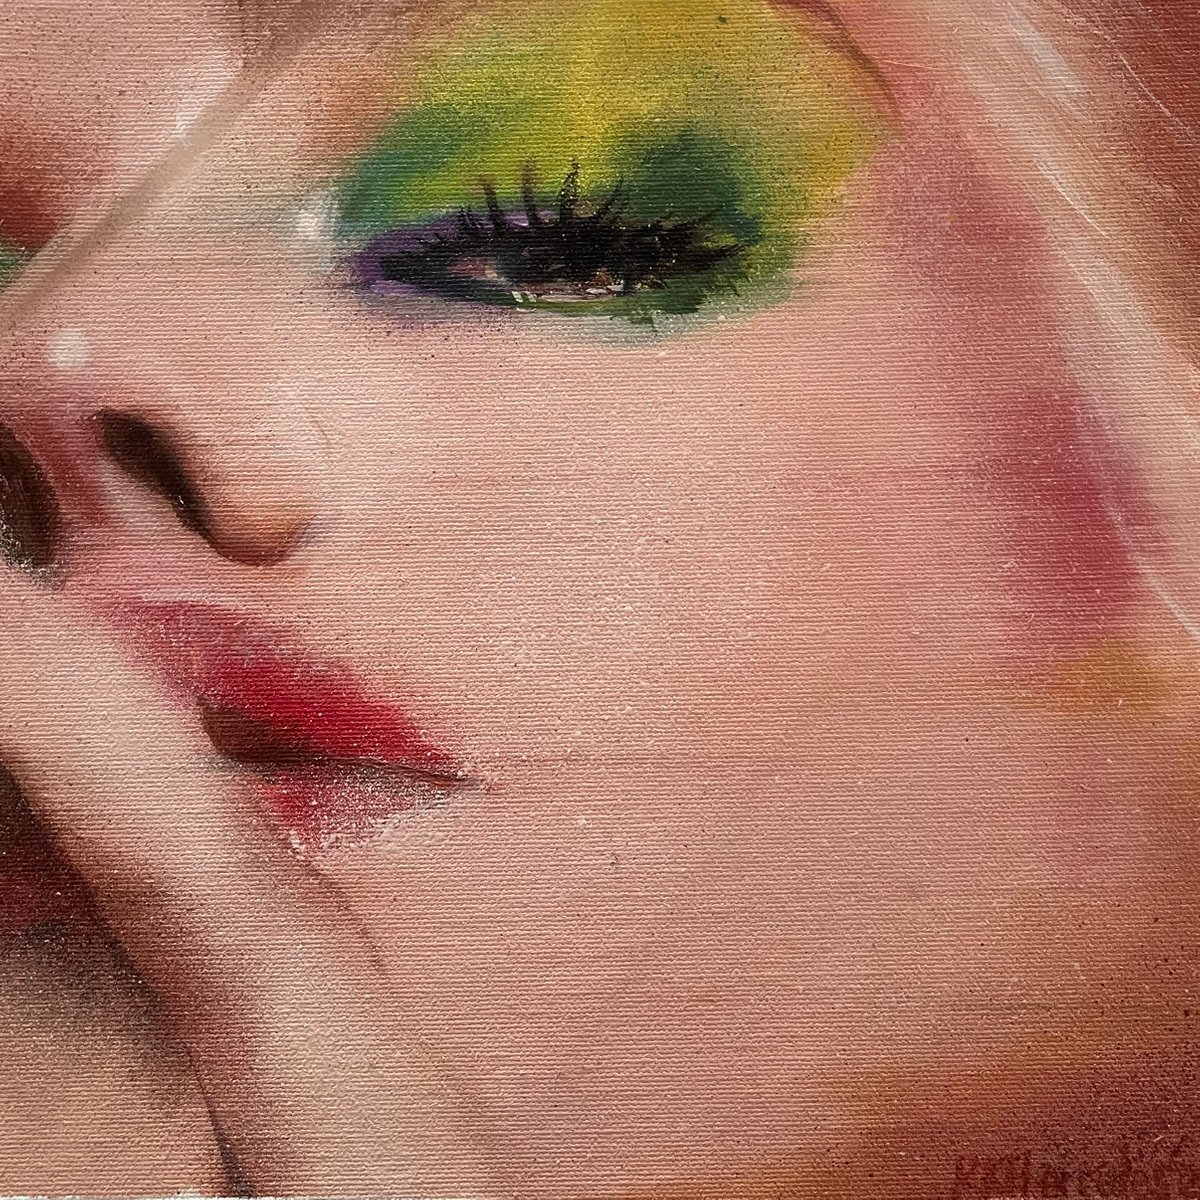 sarila - beauty oil painting of pretty blonde women female on canvas with blue green pink... by Renske Karlien Hercules